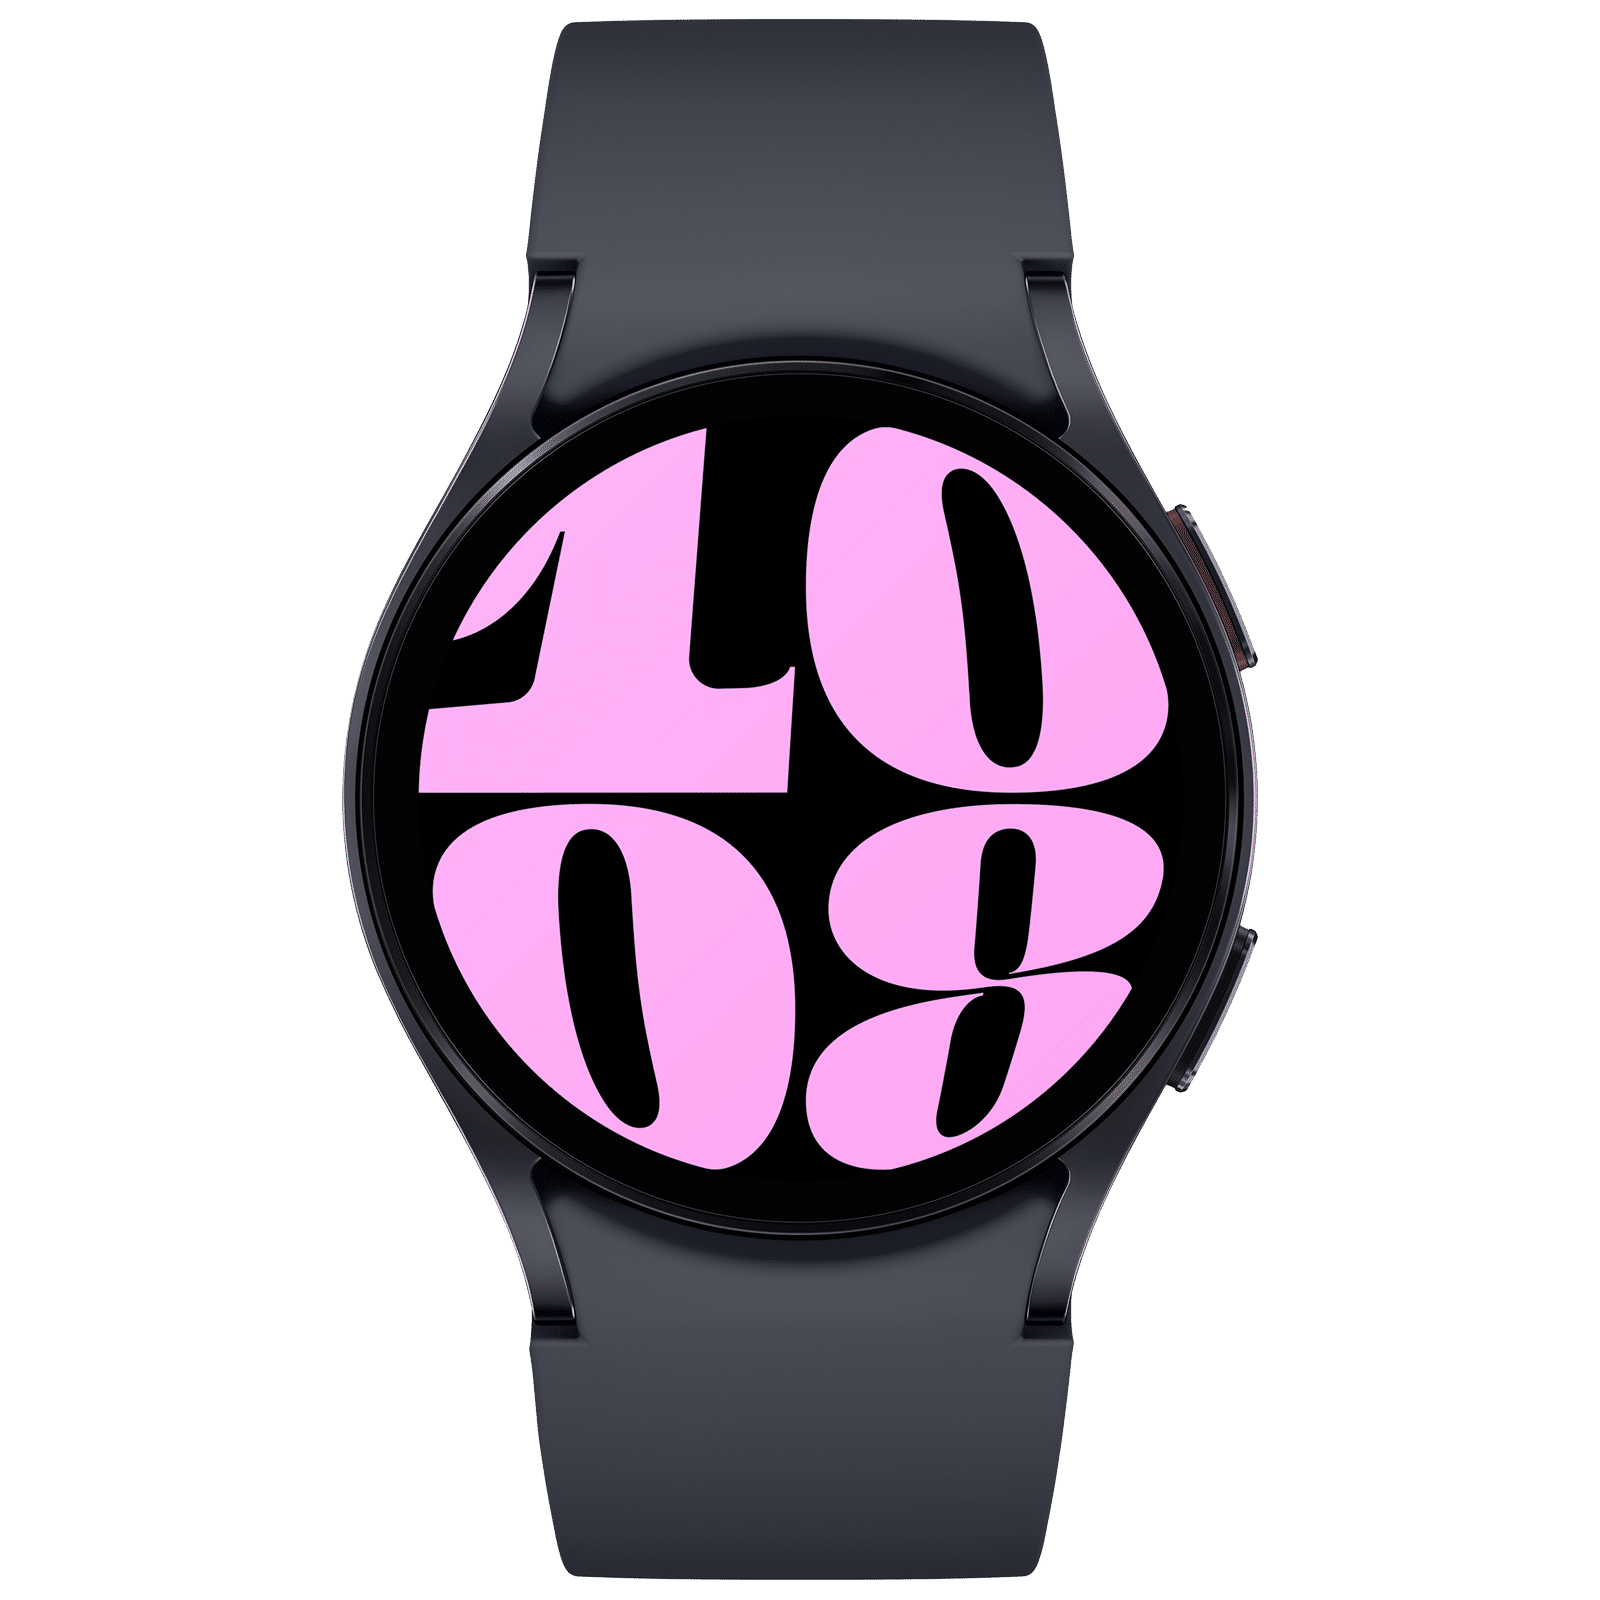 CROMA by Croma Company | Limited coupons| Minimal watch face :  r/GalaxyWatchFace